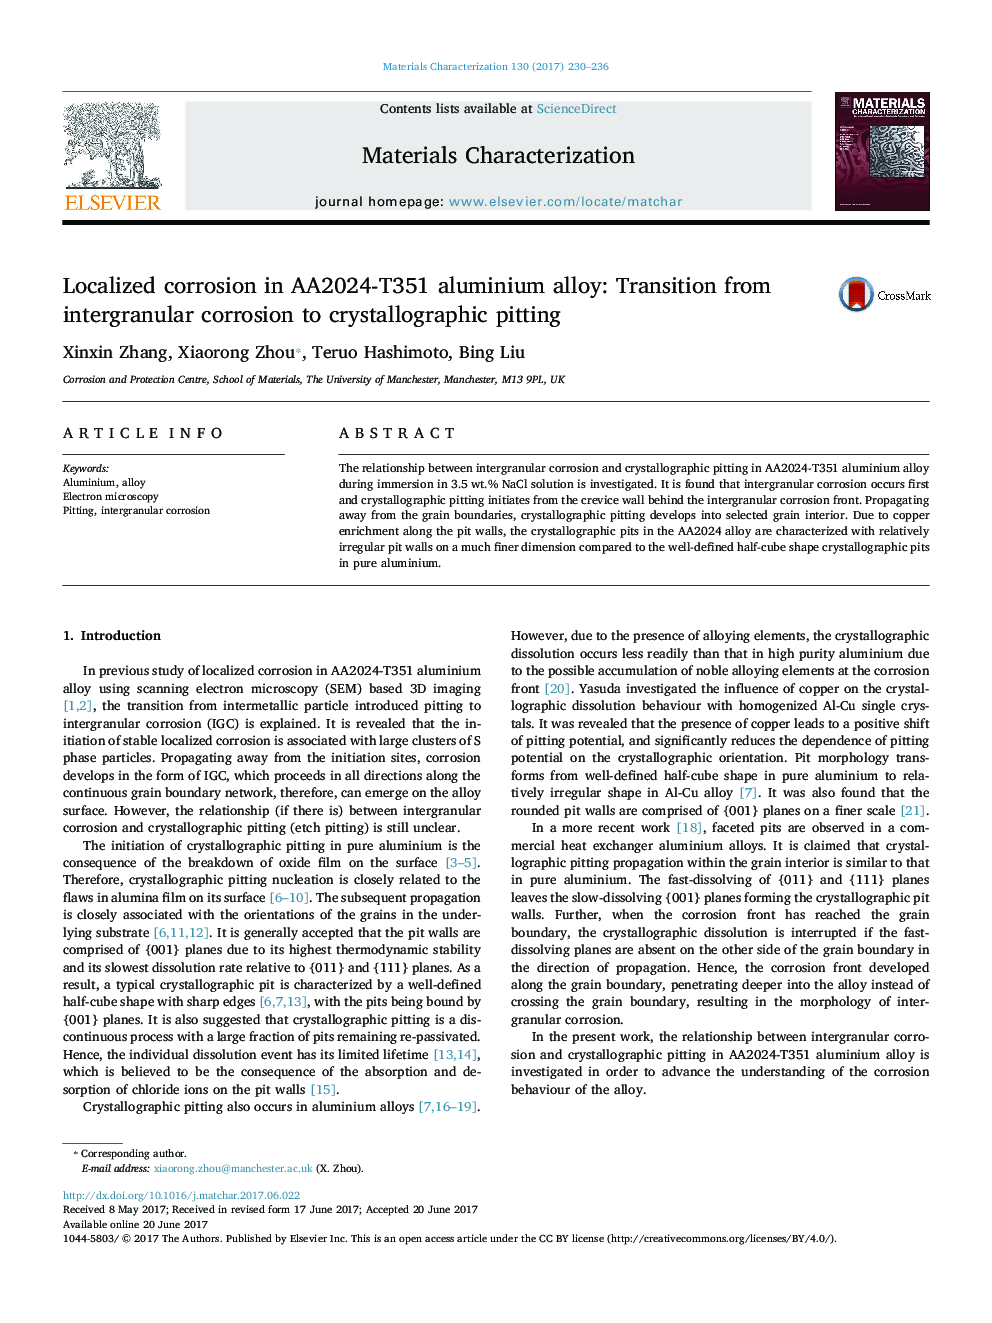 Localized corrosion in AA2024-T351 aluminium alloy: Transition from intergranular corrosion to crystallographic pitting